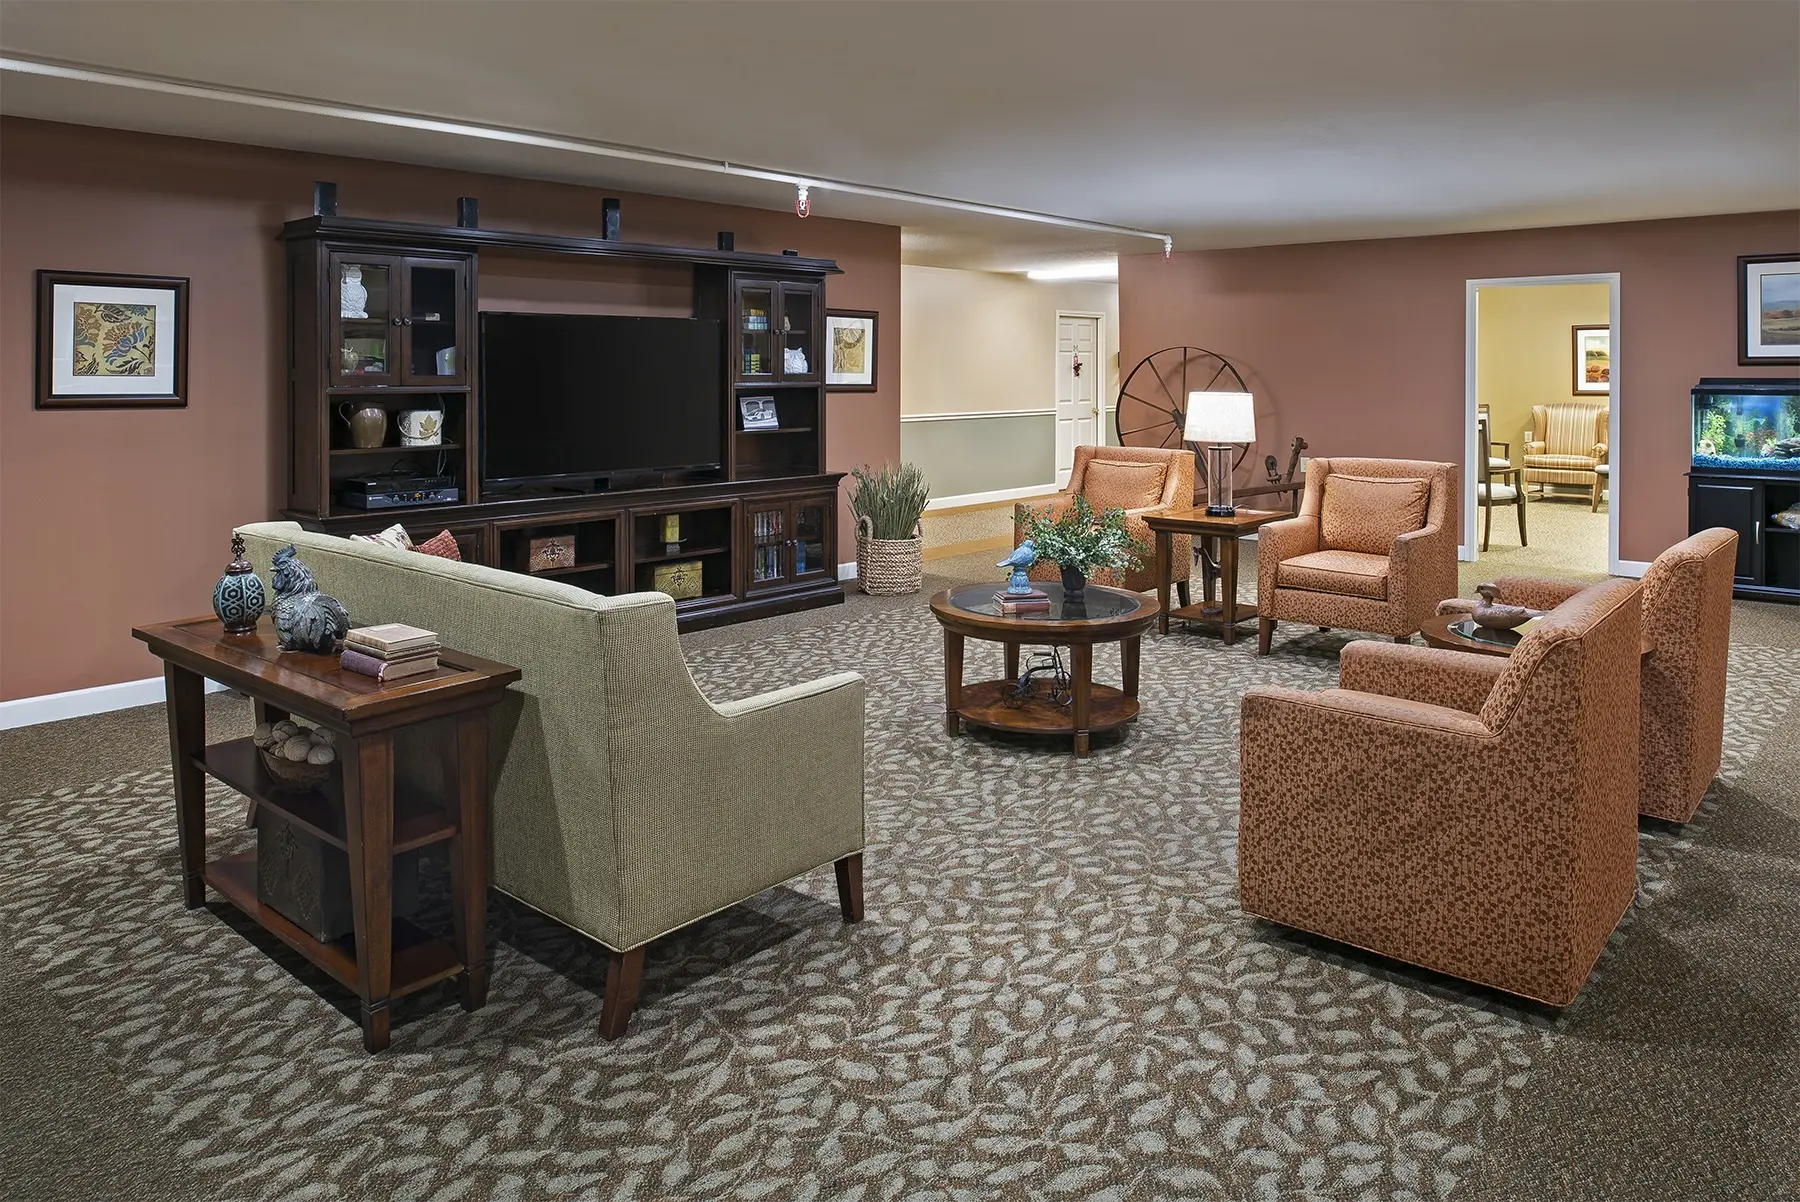 TV lounge at American House Petoskey, an assisted living facility in Petoskey, Michigan